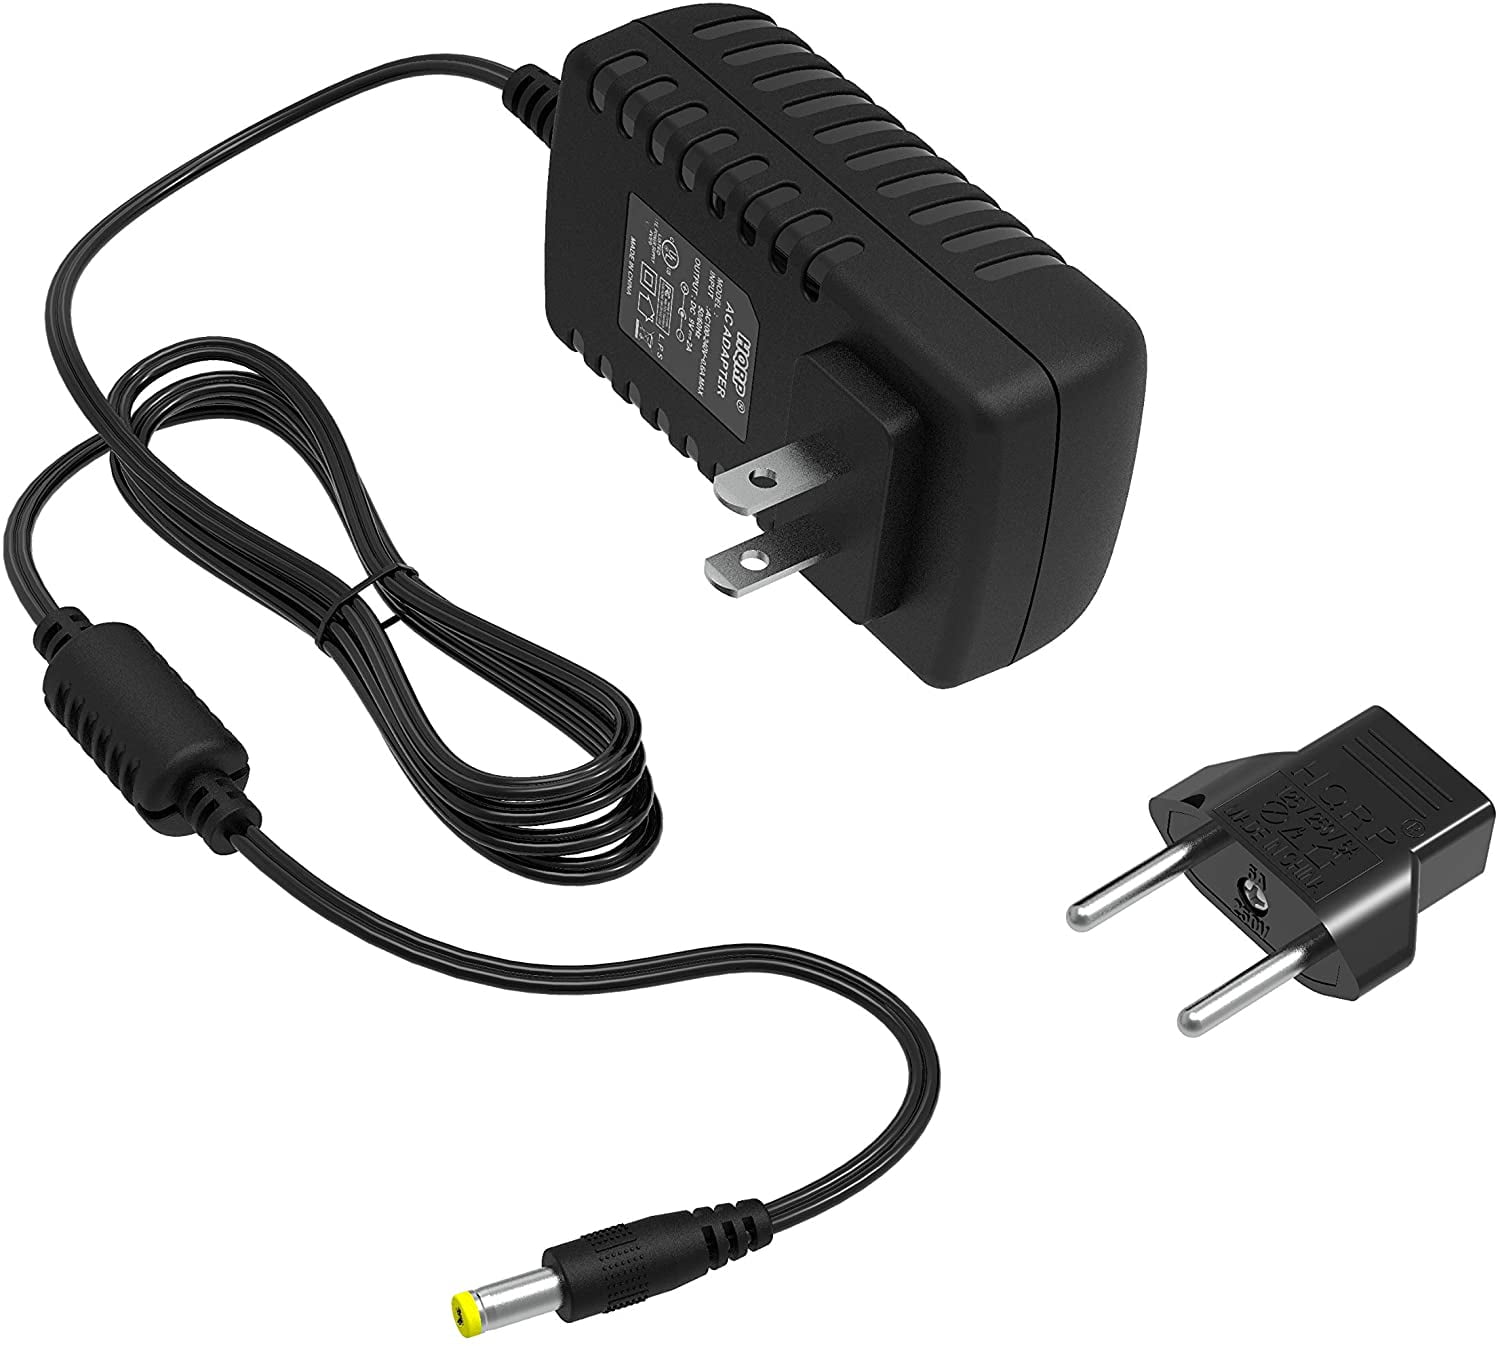 PK Power AC/DC Adapter for Roland PSB-4UREPL BOSS Power Supply Cord Cable PS Charger Mains PSU 